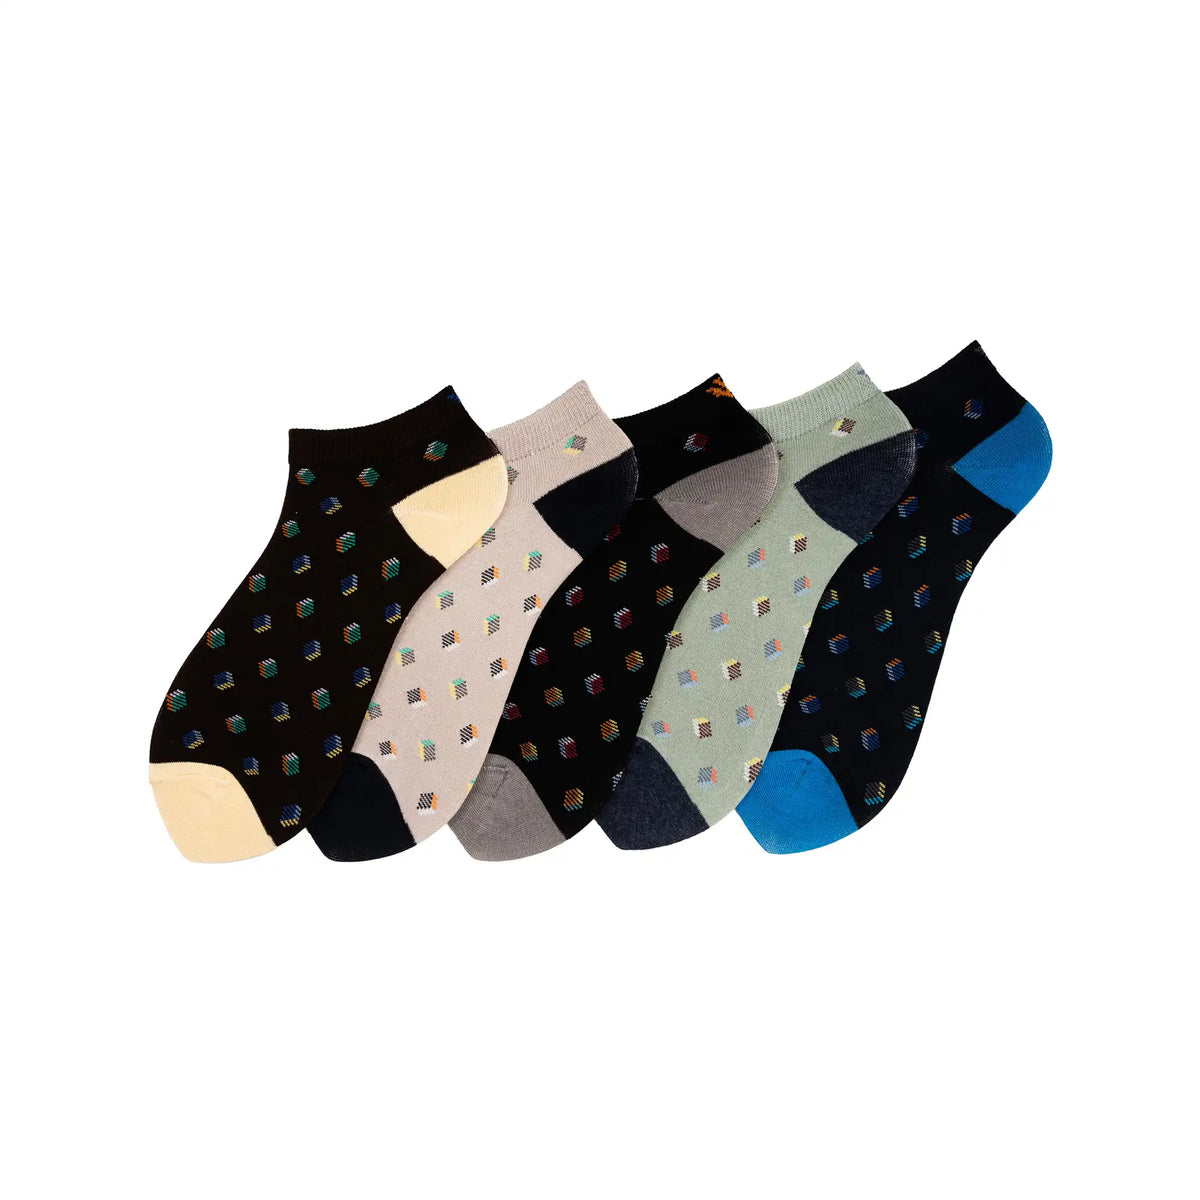 Young Wings Men's Multi Colour Cotton Fabric Design Low Ankle Length Socks - Pack of 5, Style no. 1715-M1